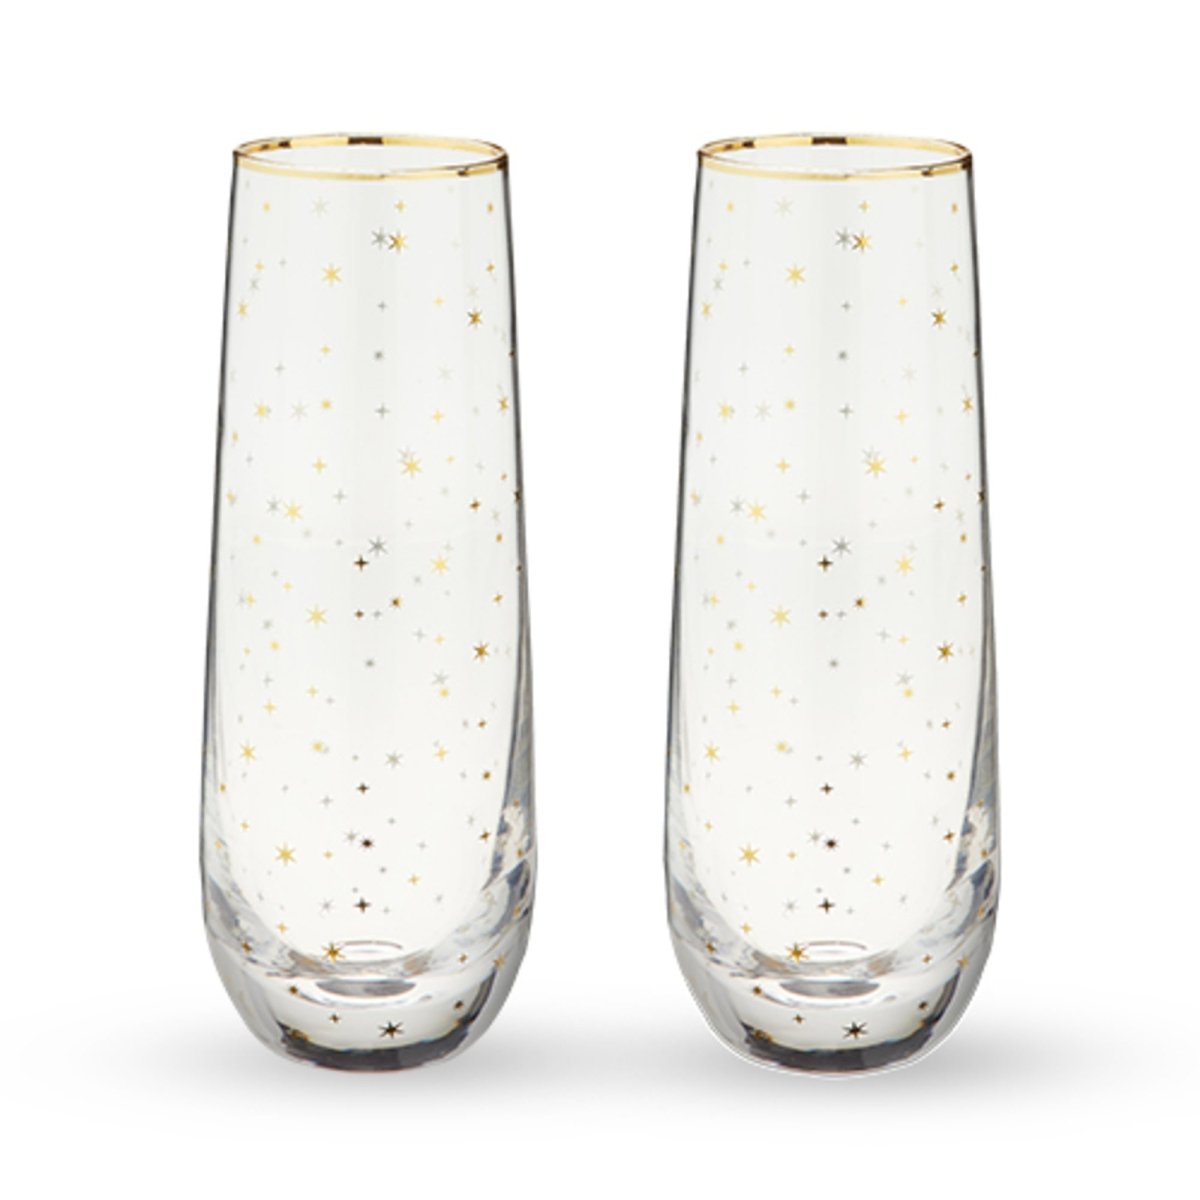 Twine Starlight Stemless Champagne Flute, Set of 2 - lily & onyx